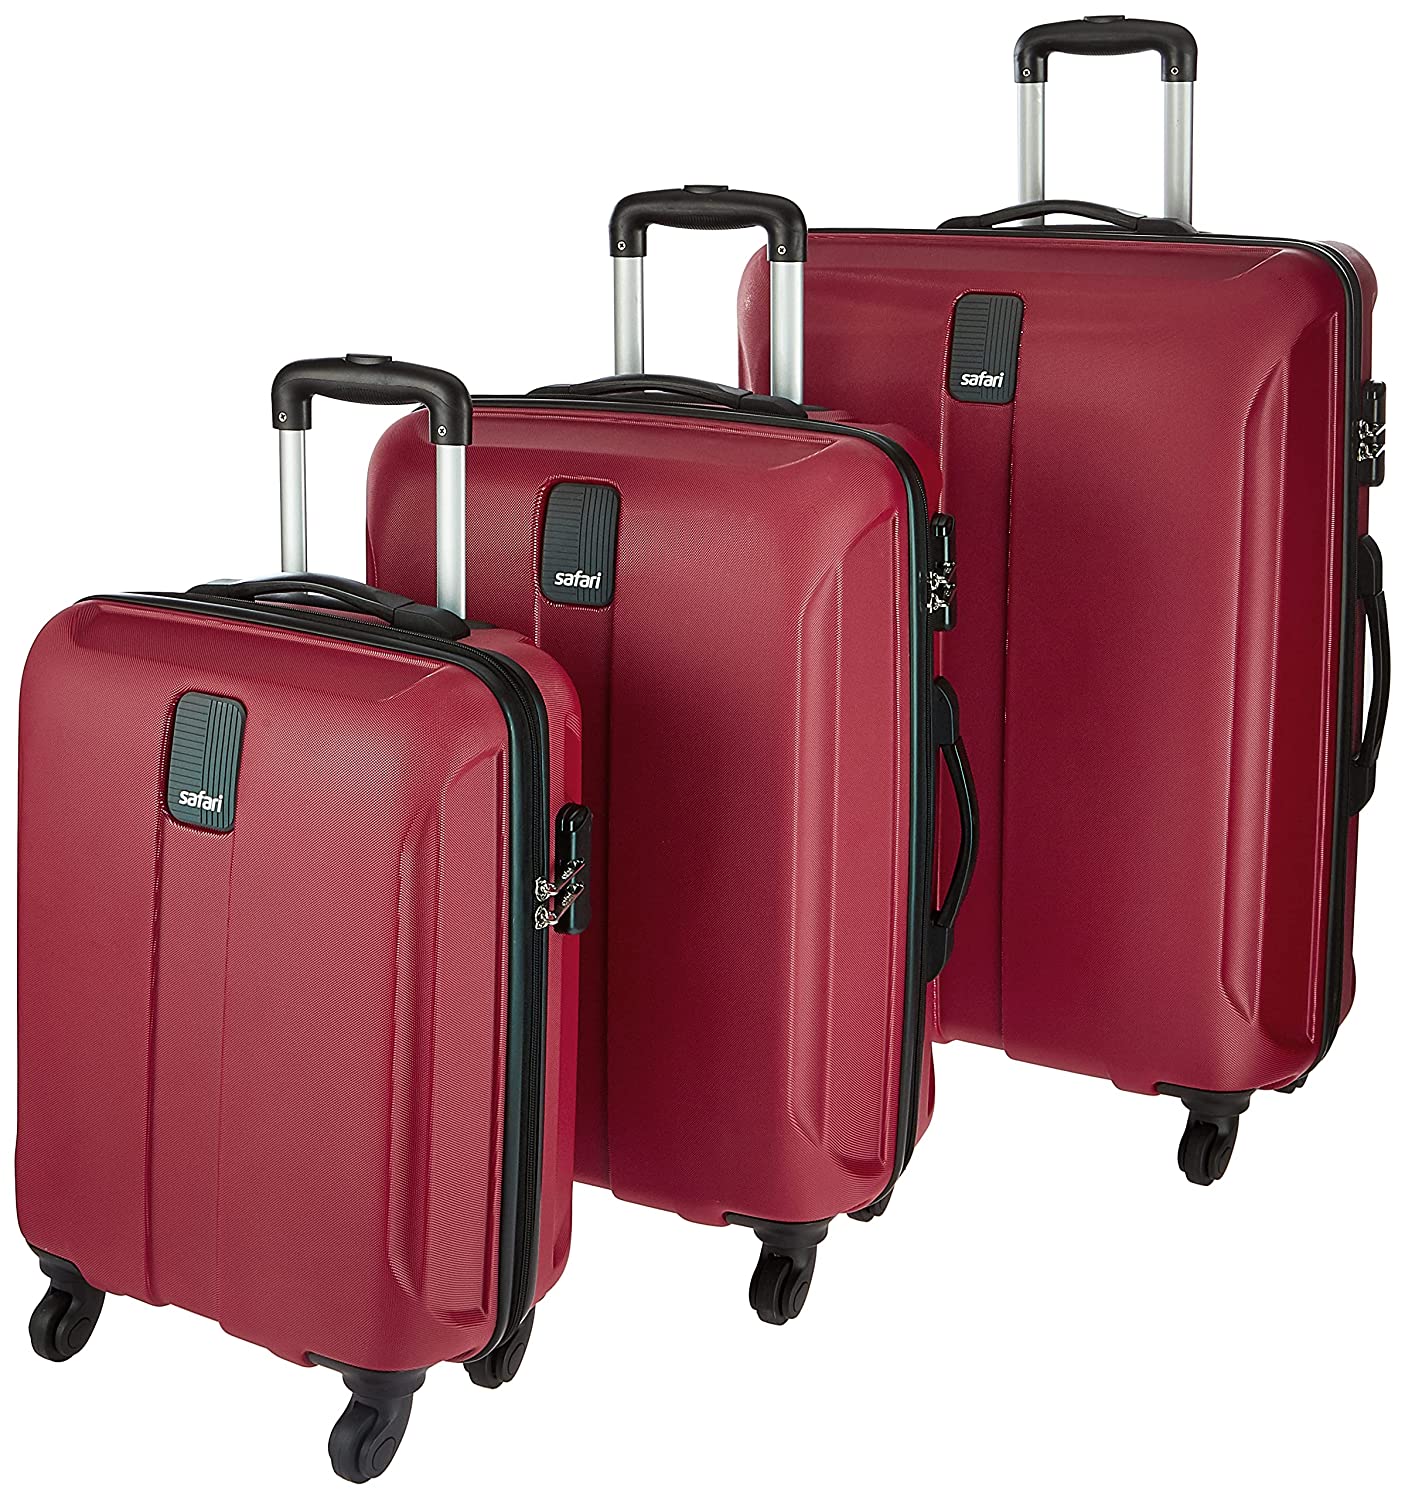 Buy Hard and Soft luggage at Best Prices Online